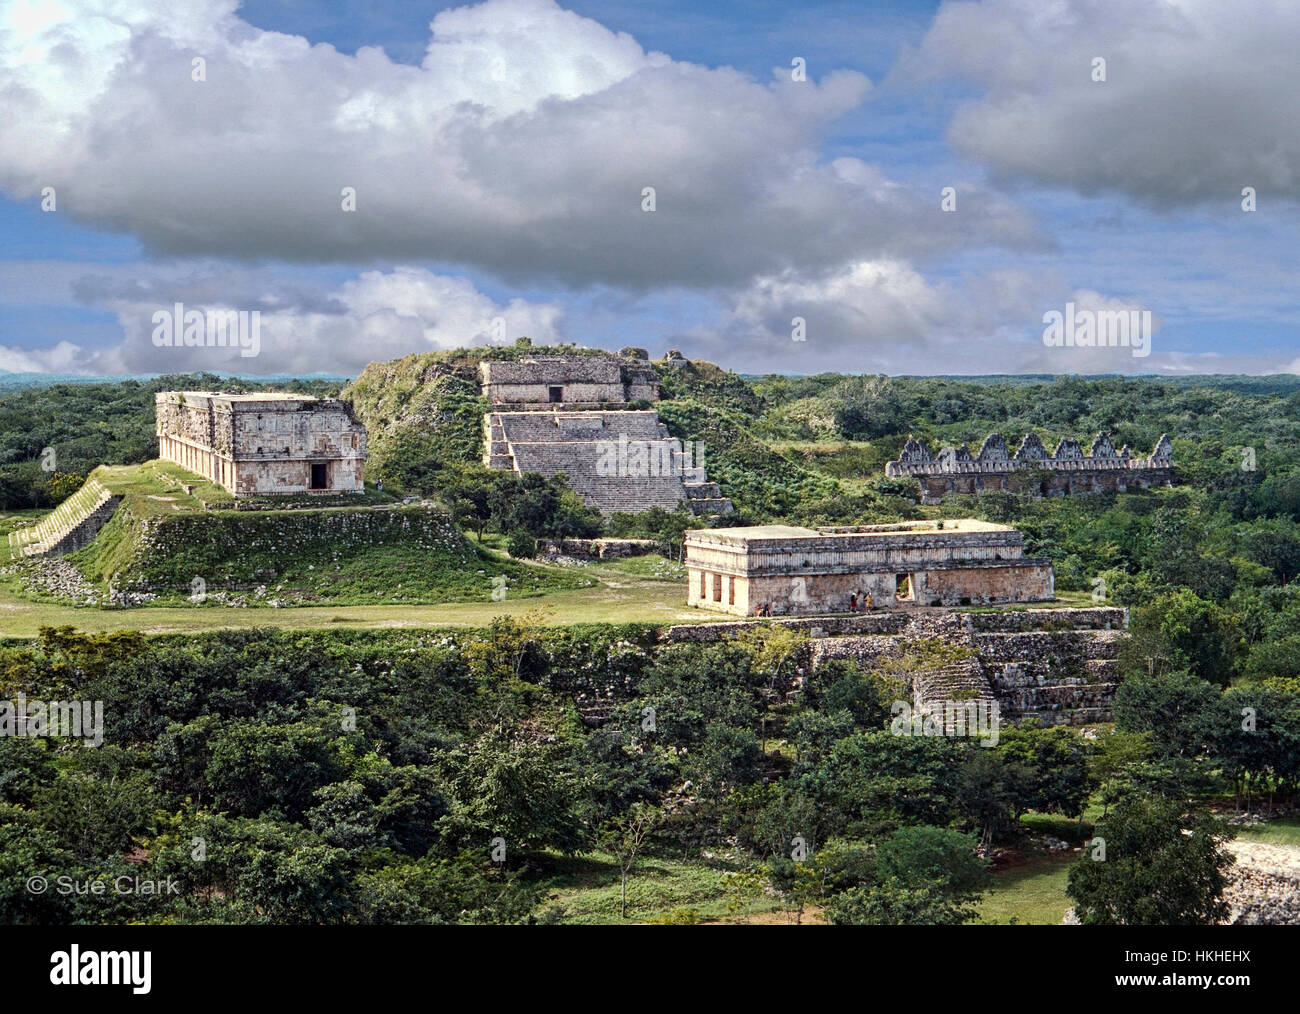 This is one section of the Mayan ruins at Uxmal Yucatan Mexico. The governor's palace is seen on the left. Stock Photo